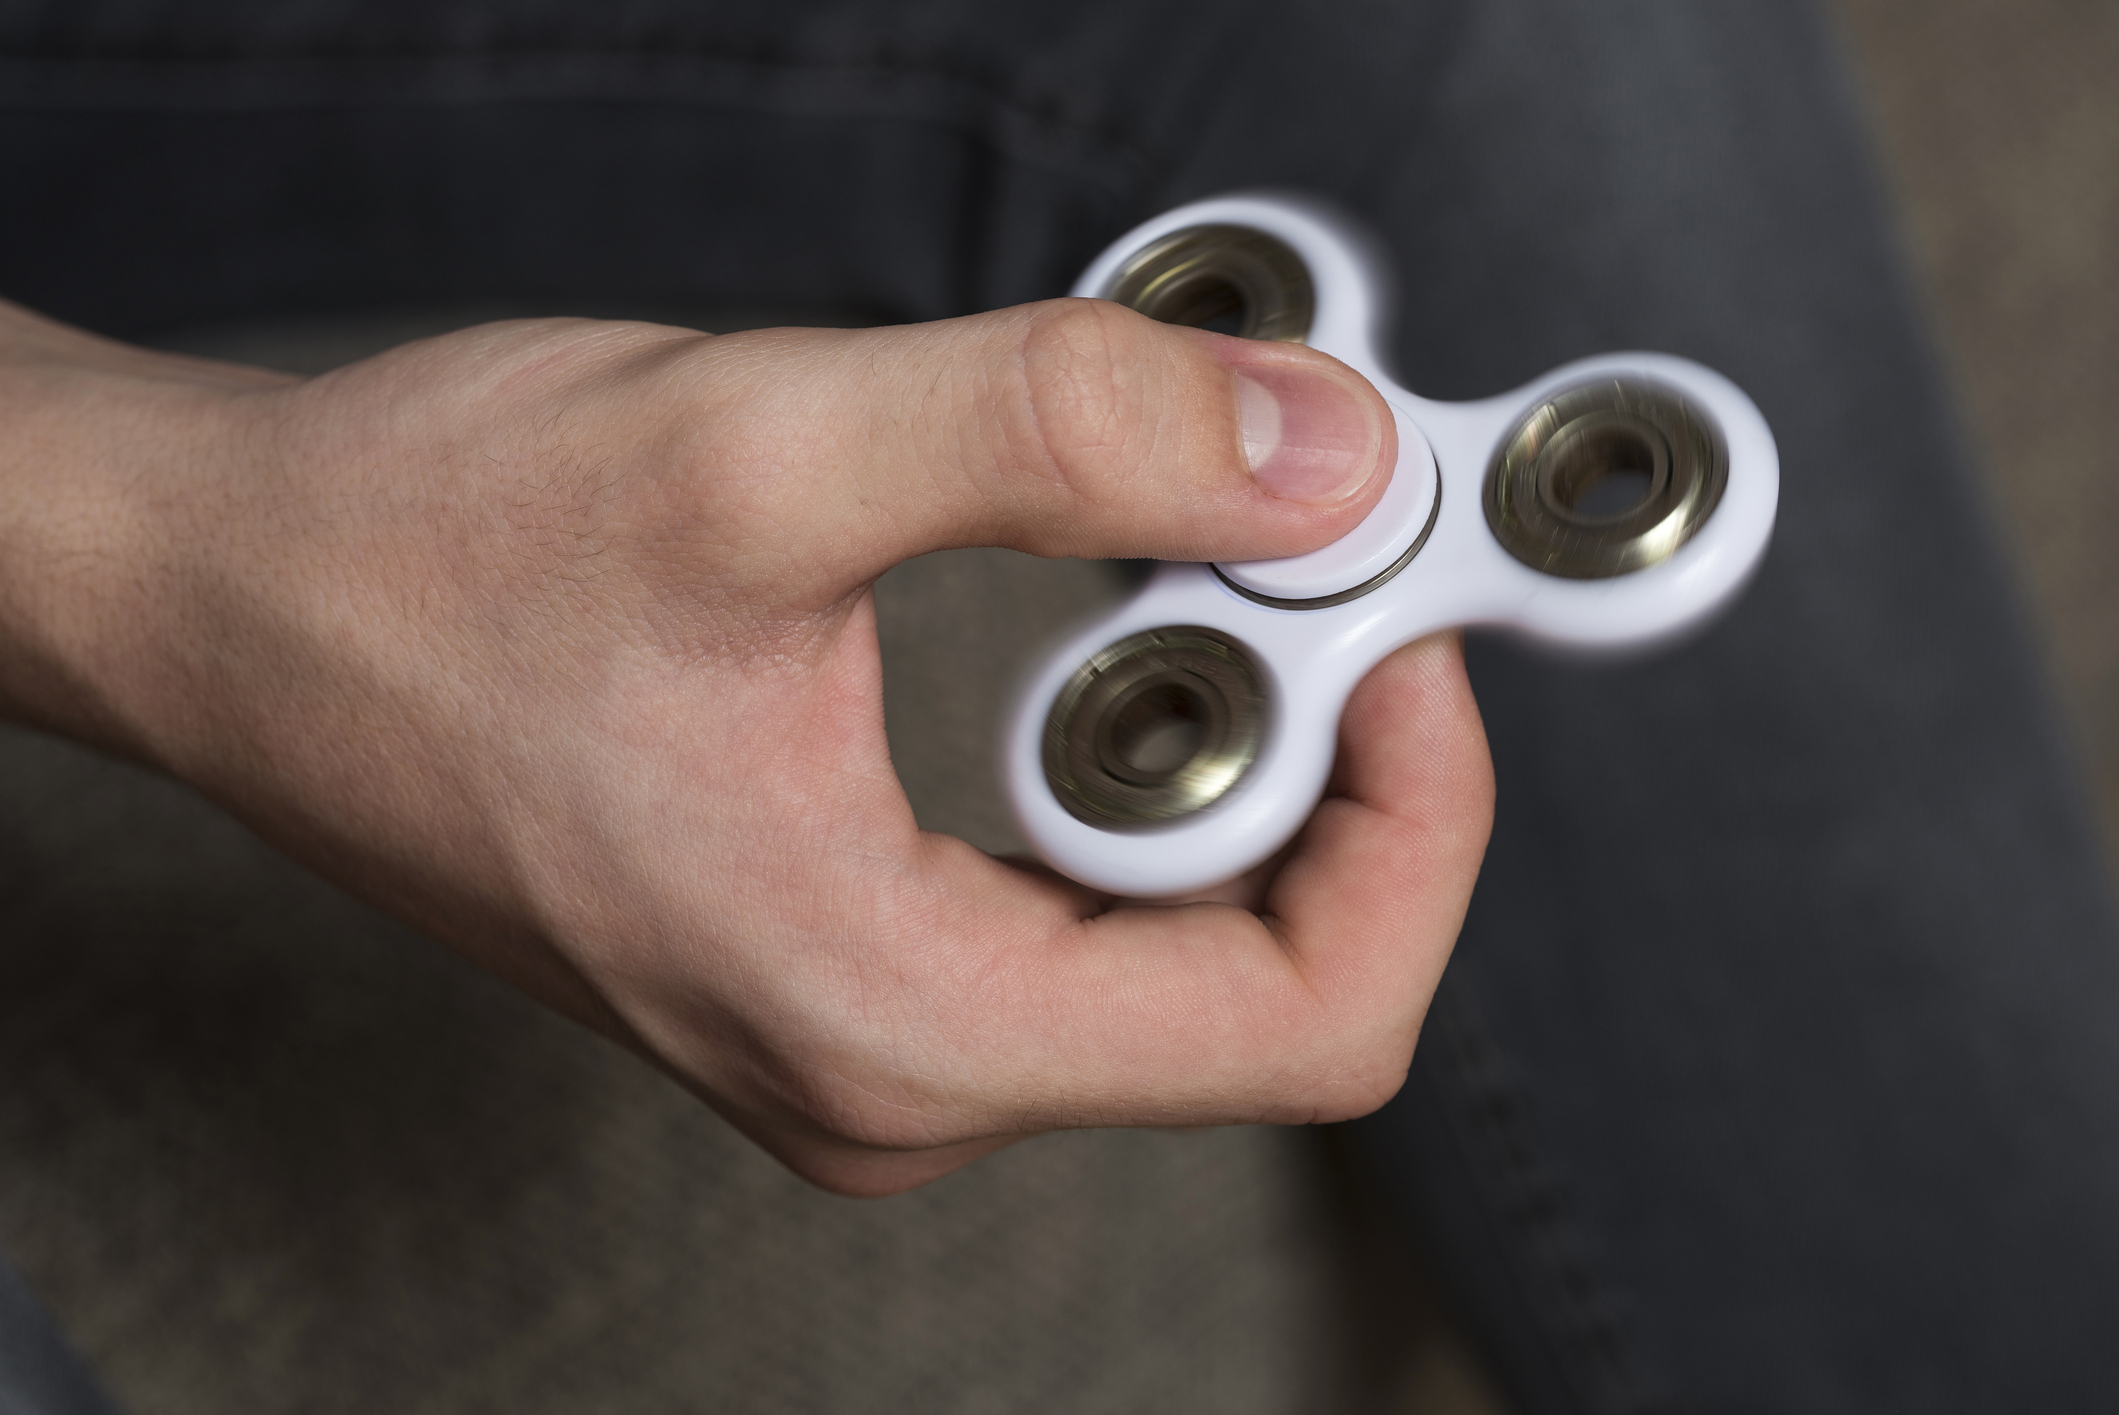 Germany destroy 35 of fidget spinners imported from China - National | Globalnews.ca